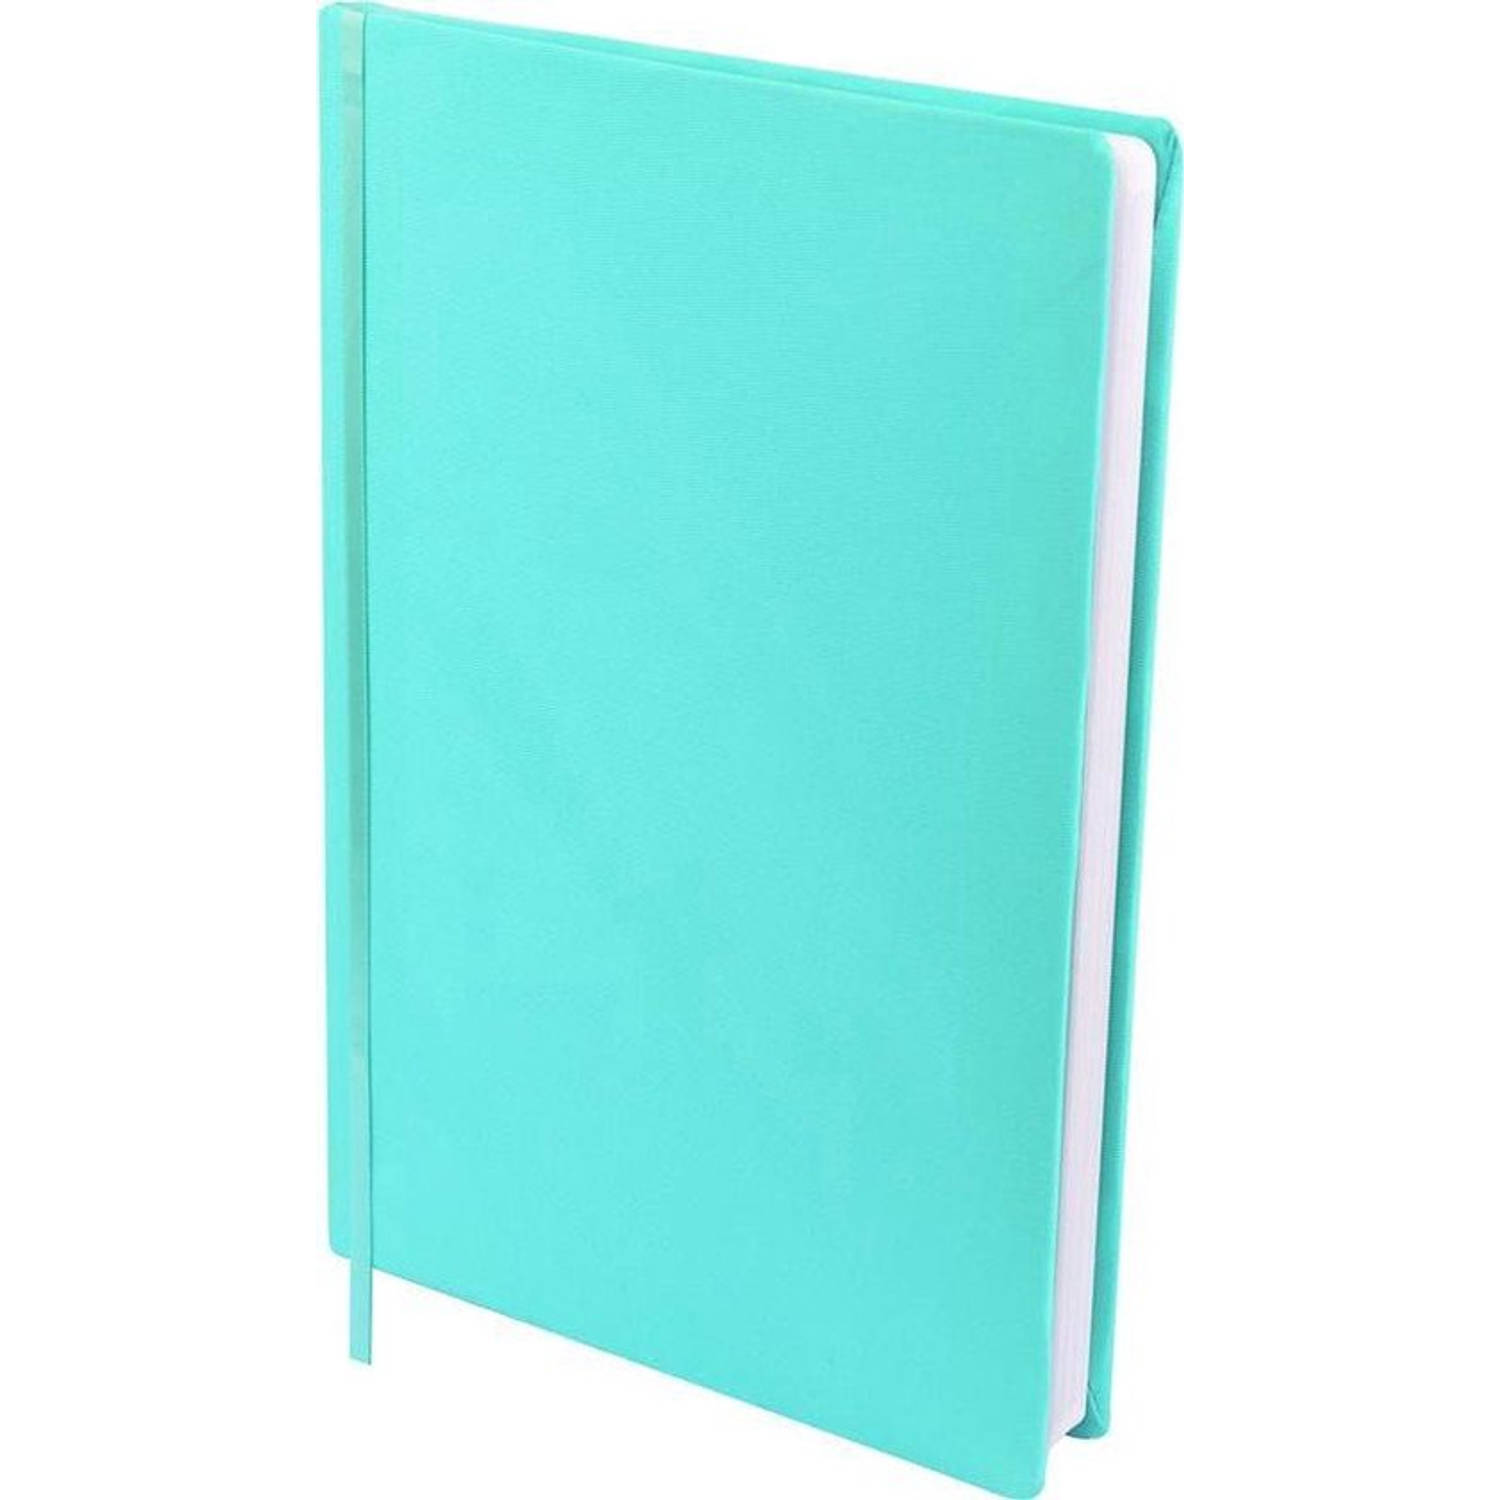 Dresz Stretchable Book Cover A4 Turquoise 6-pack Turquoise